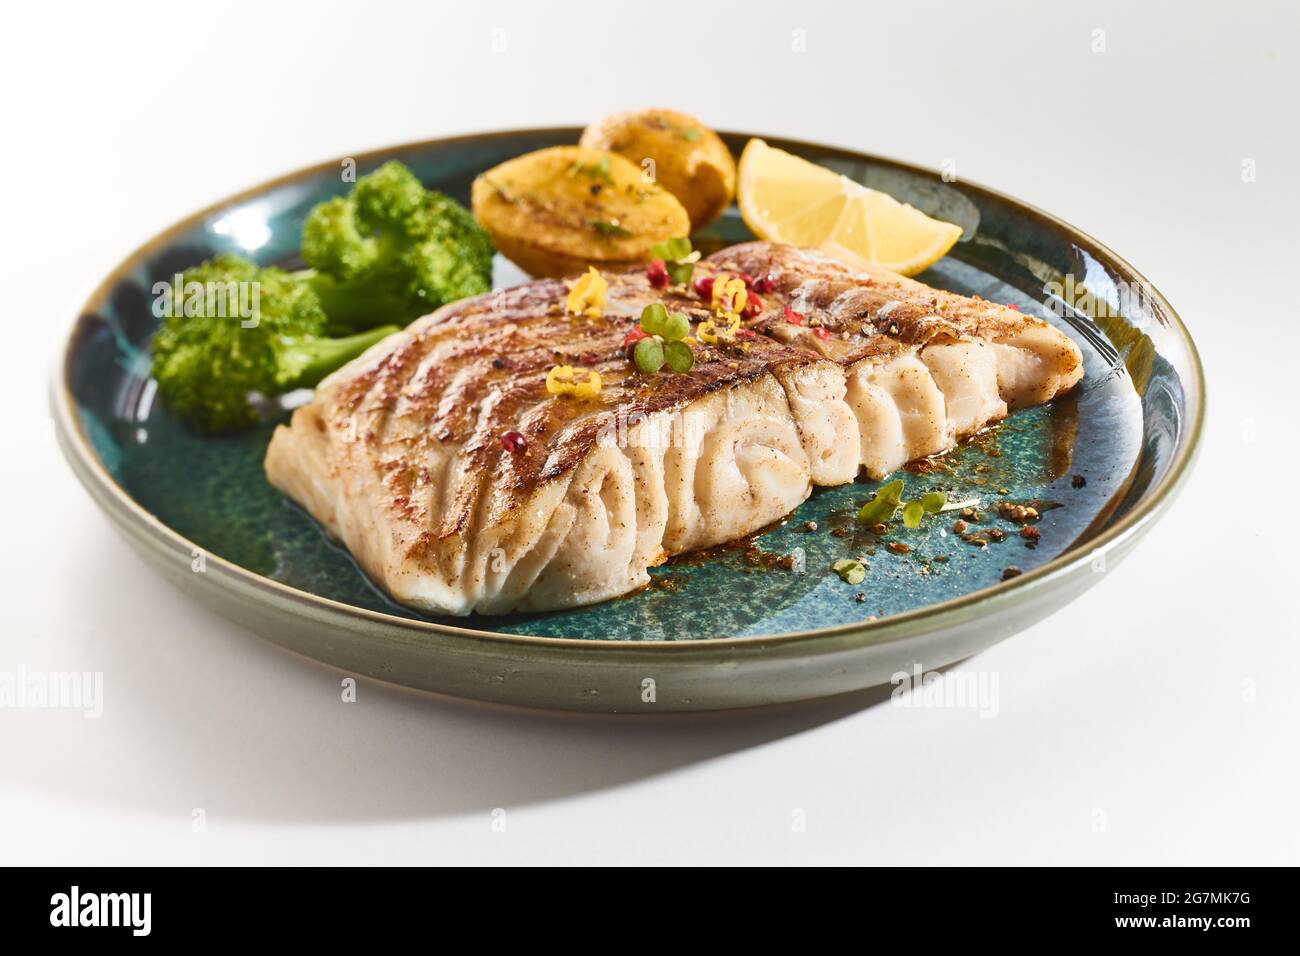 Palatable fish fillet on plate with broccoli and potato served on white background for lunch Stock Photo